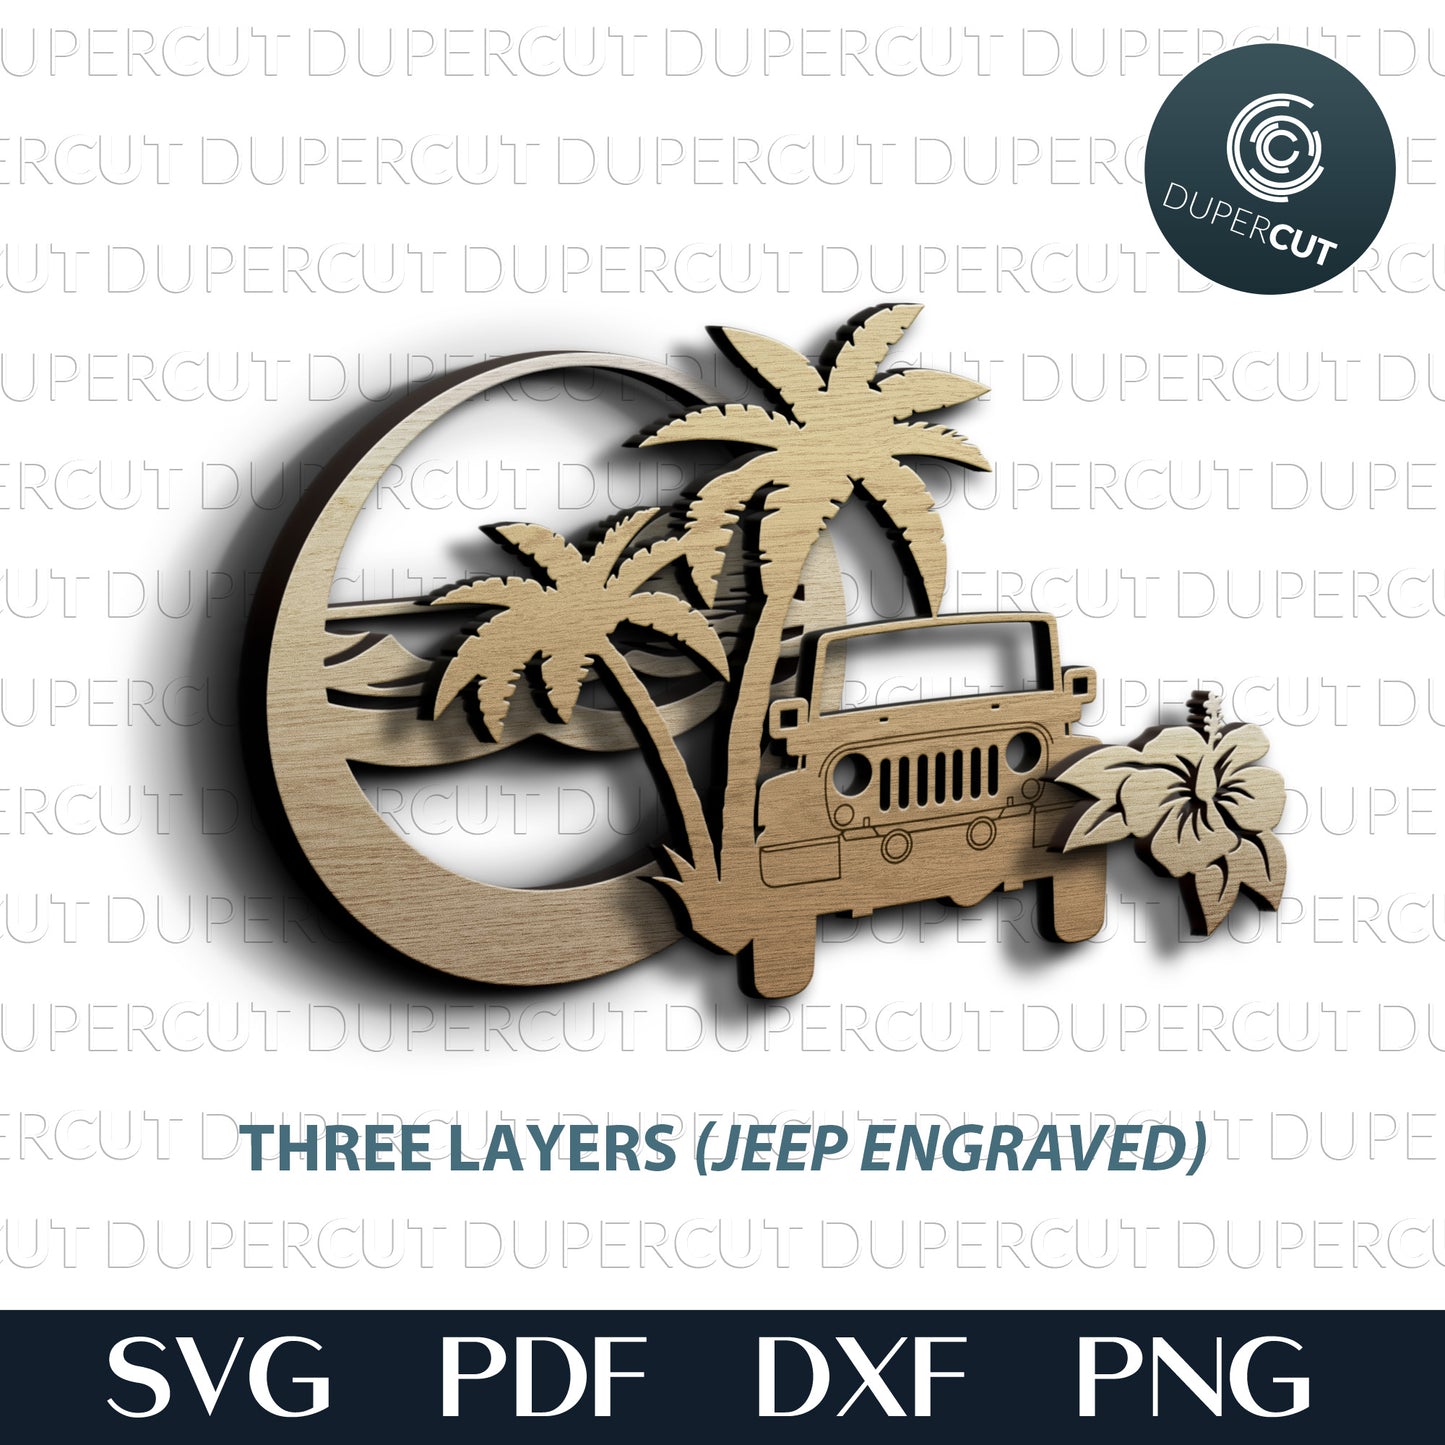 Jeep beach scene sign - layered cutting files - SVG PDF DXF vector template for Glowforge, laser cutters, Cricut, Silhouette Cameo